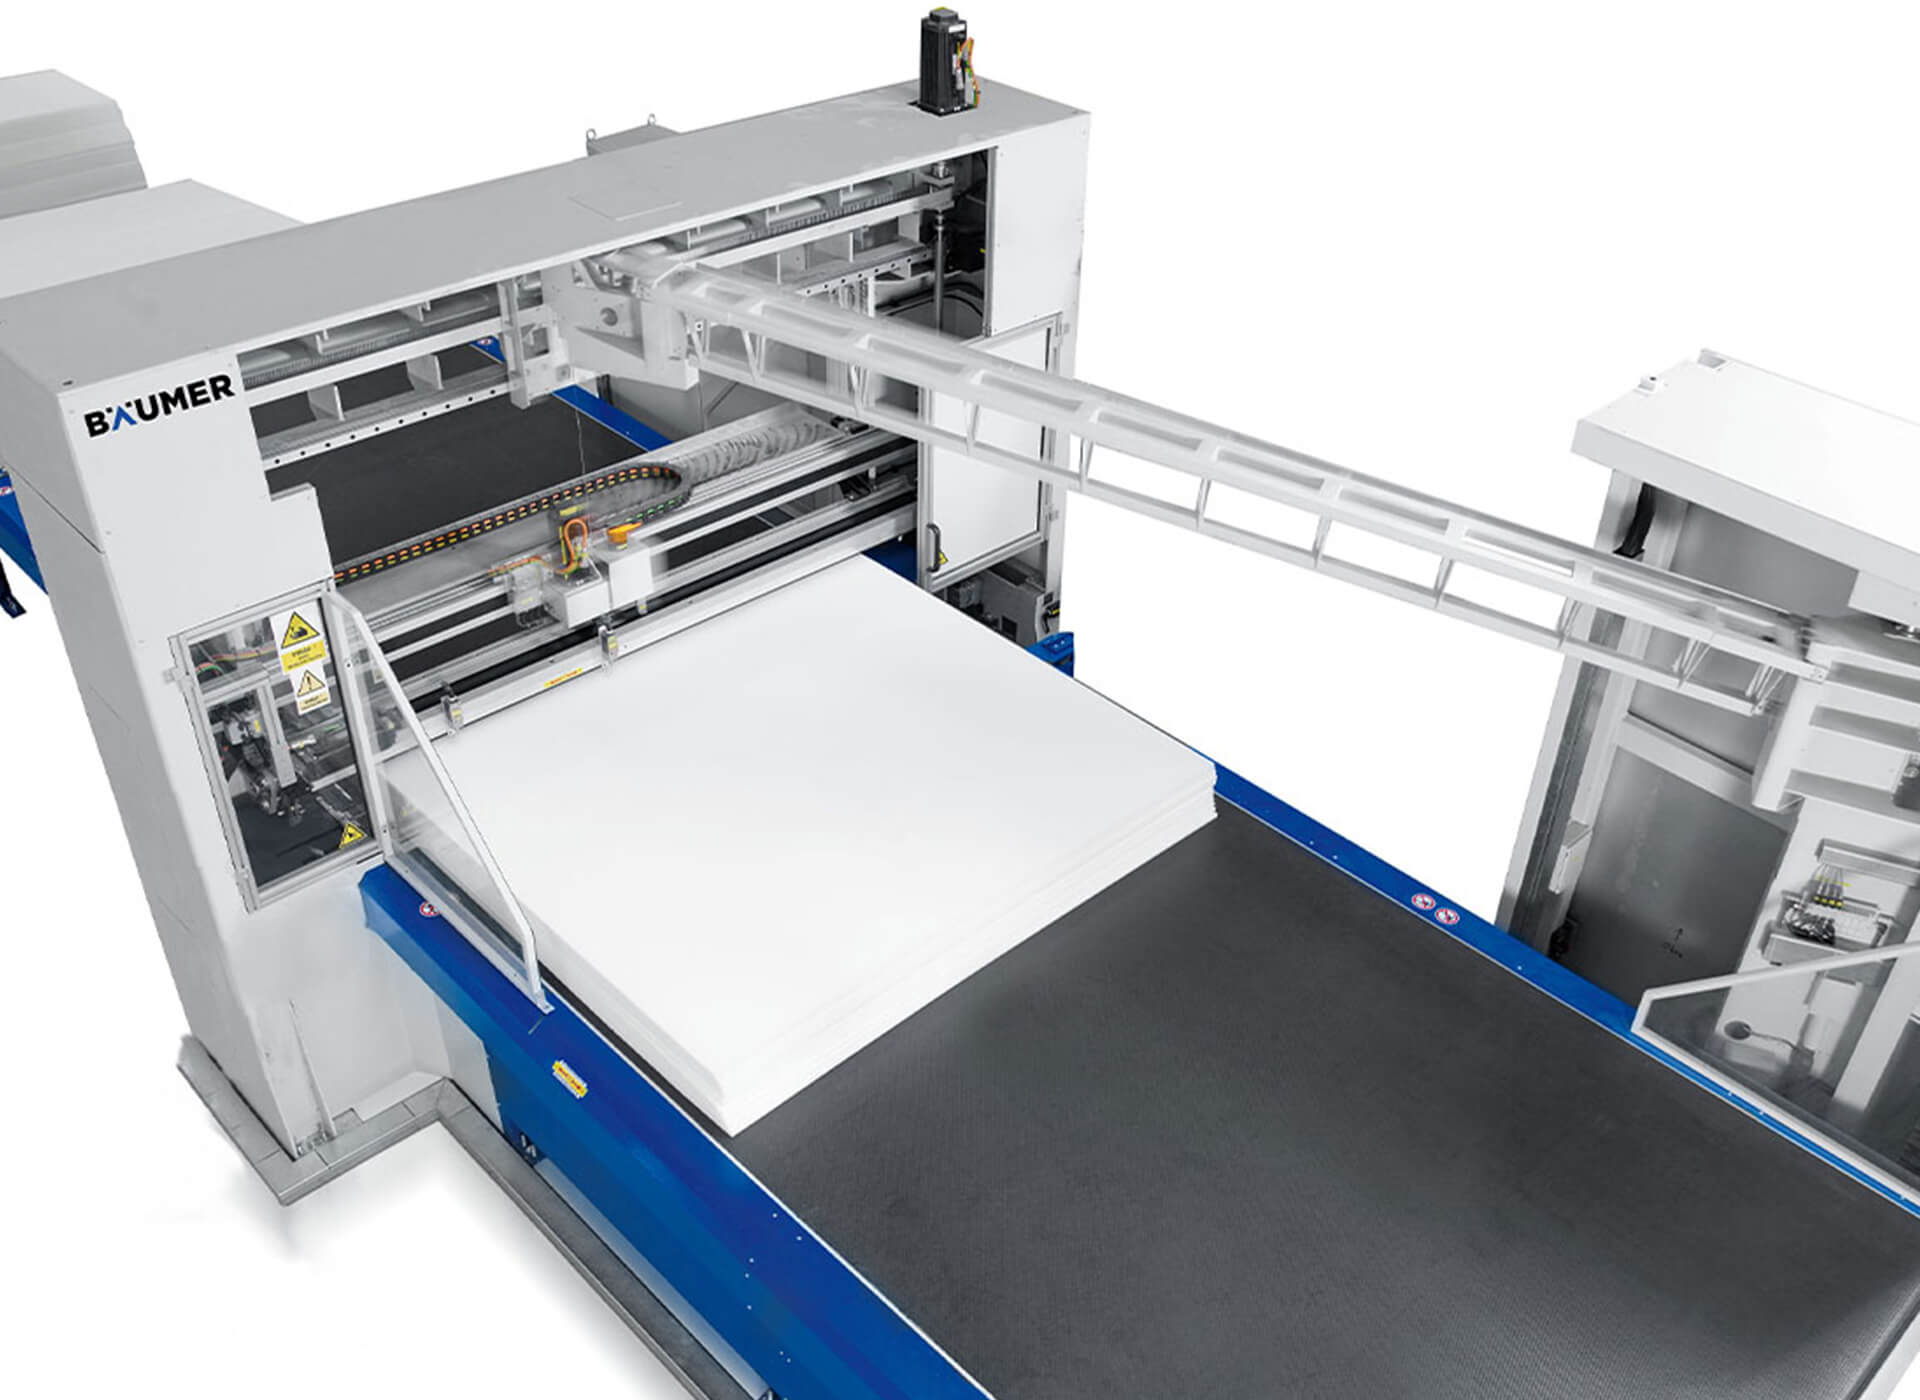 Vertical contour cutting machine with knife